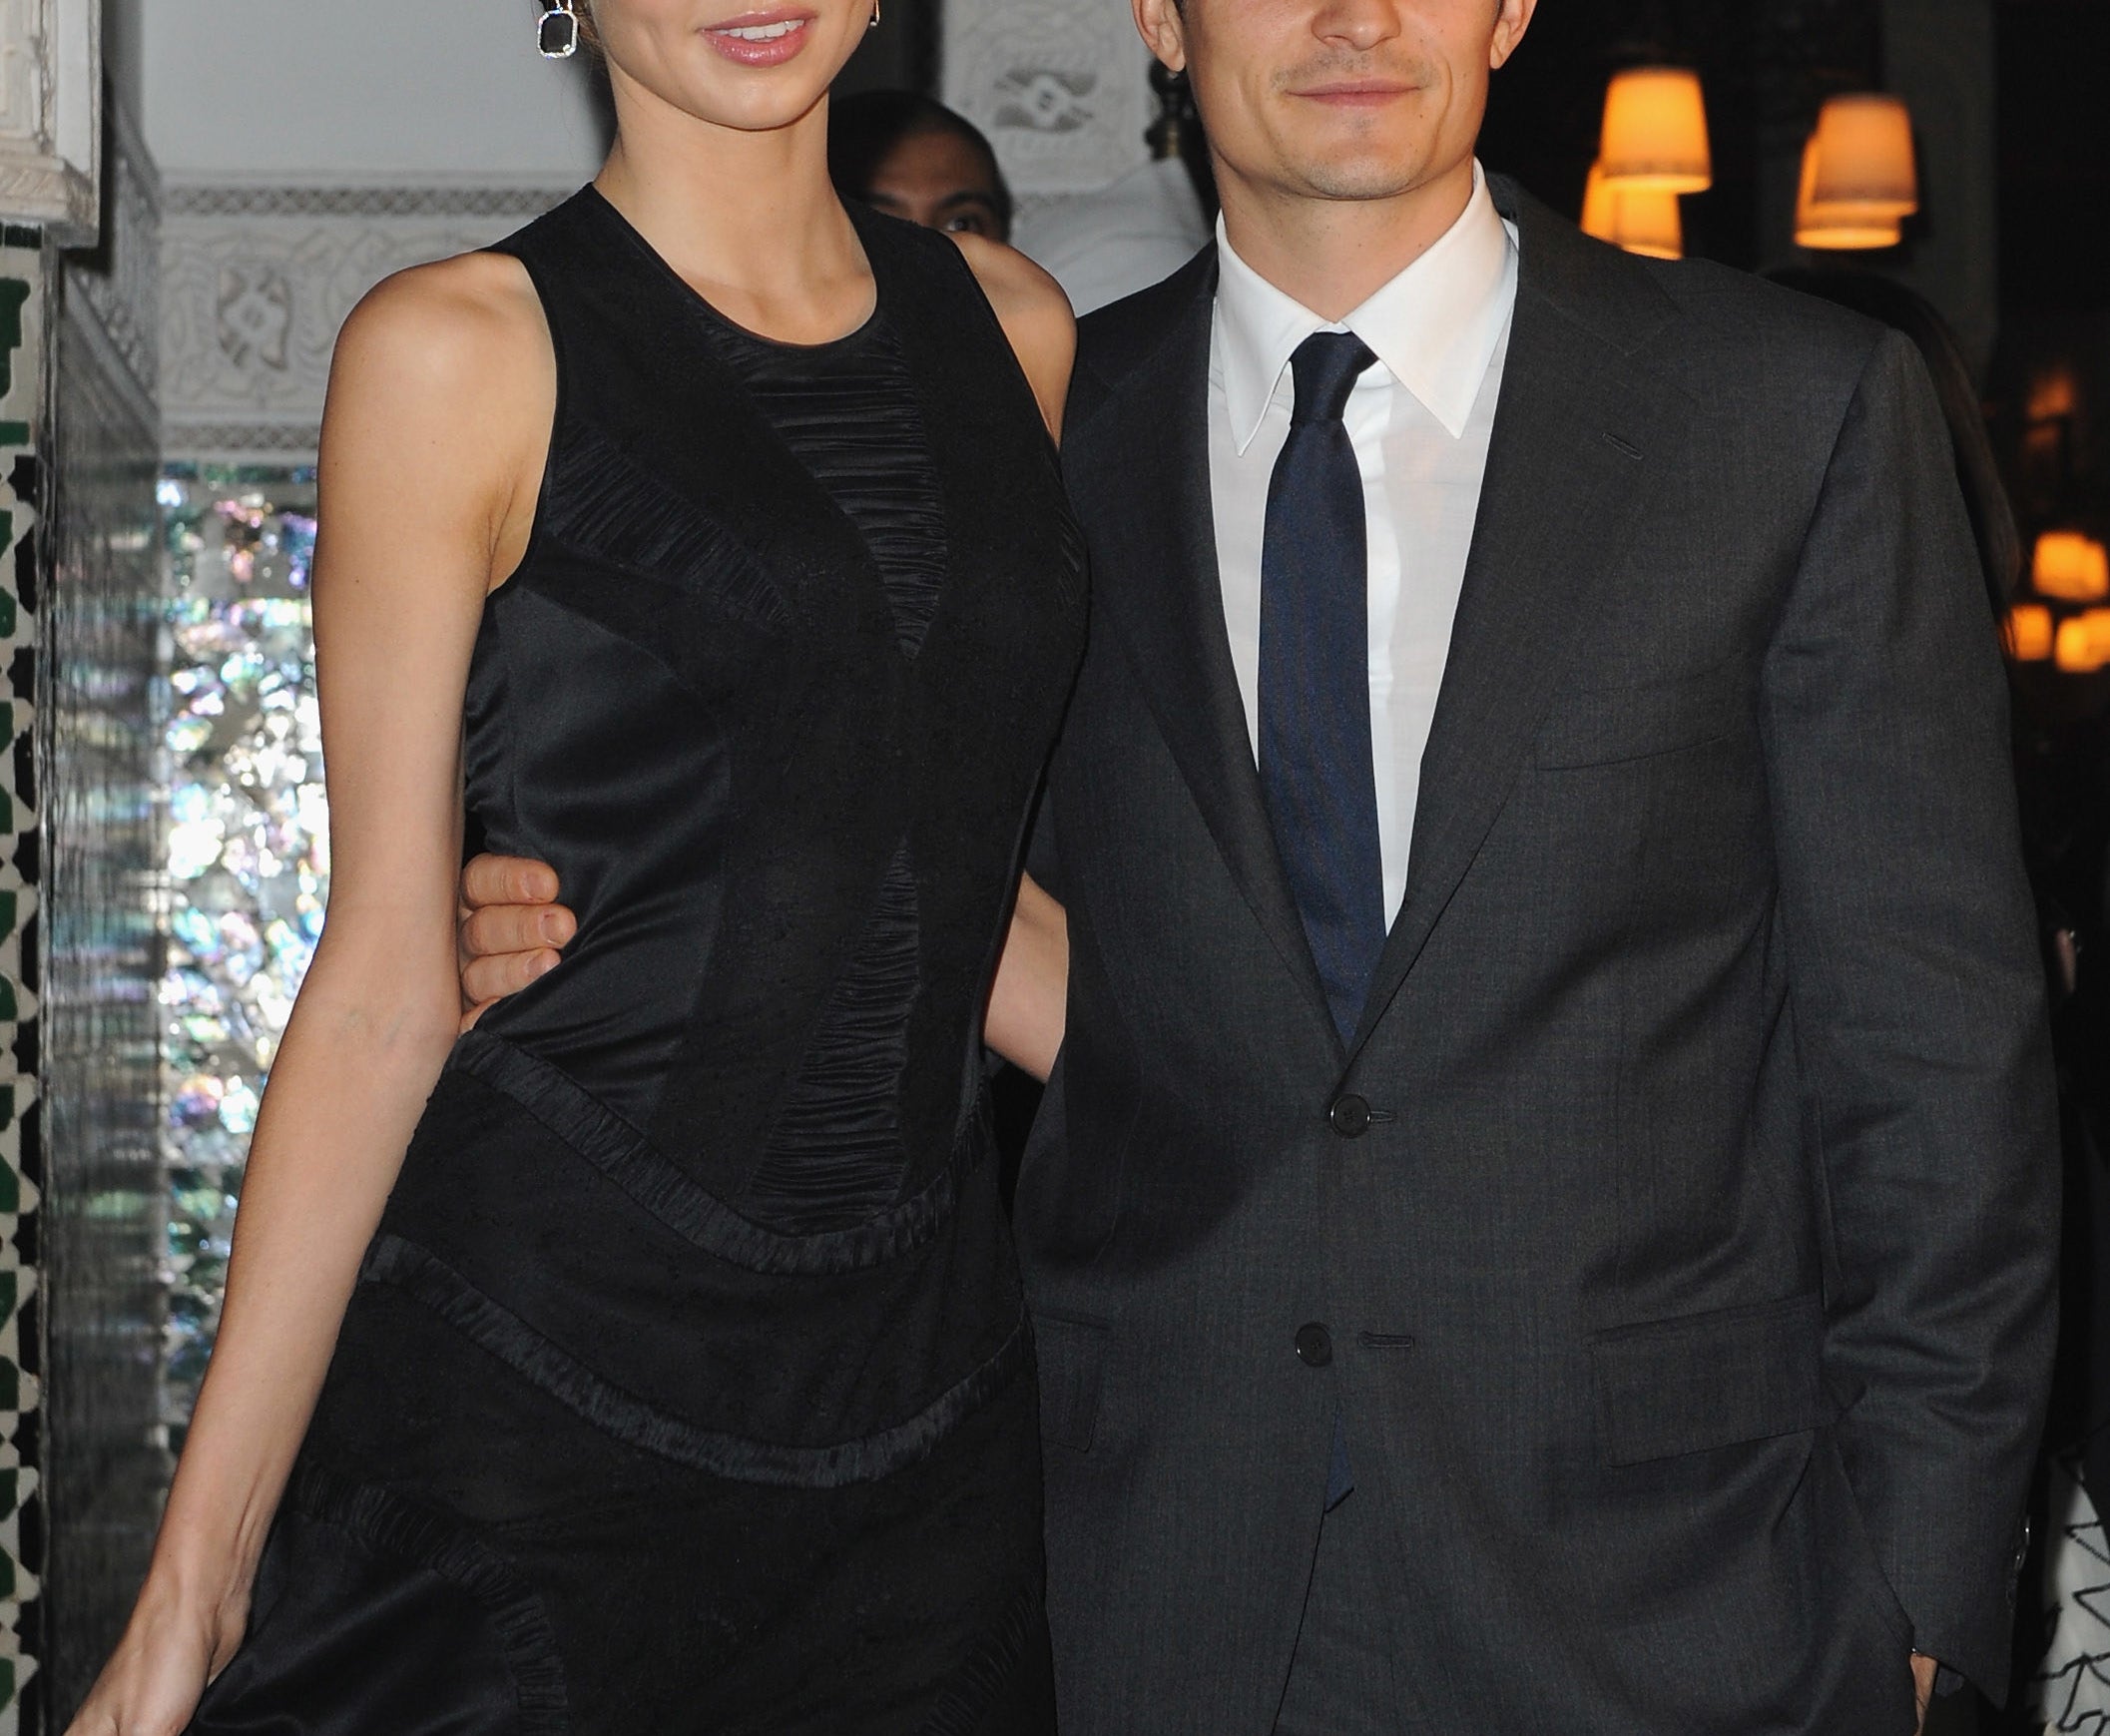 Miranda Kerr in a black gown and Orlando Bloom in dark grey suit and navy tie at an even in 2009.